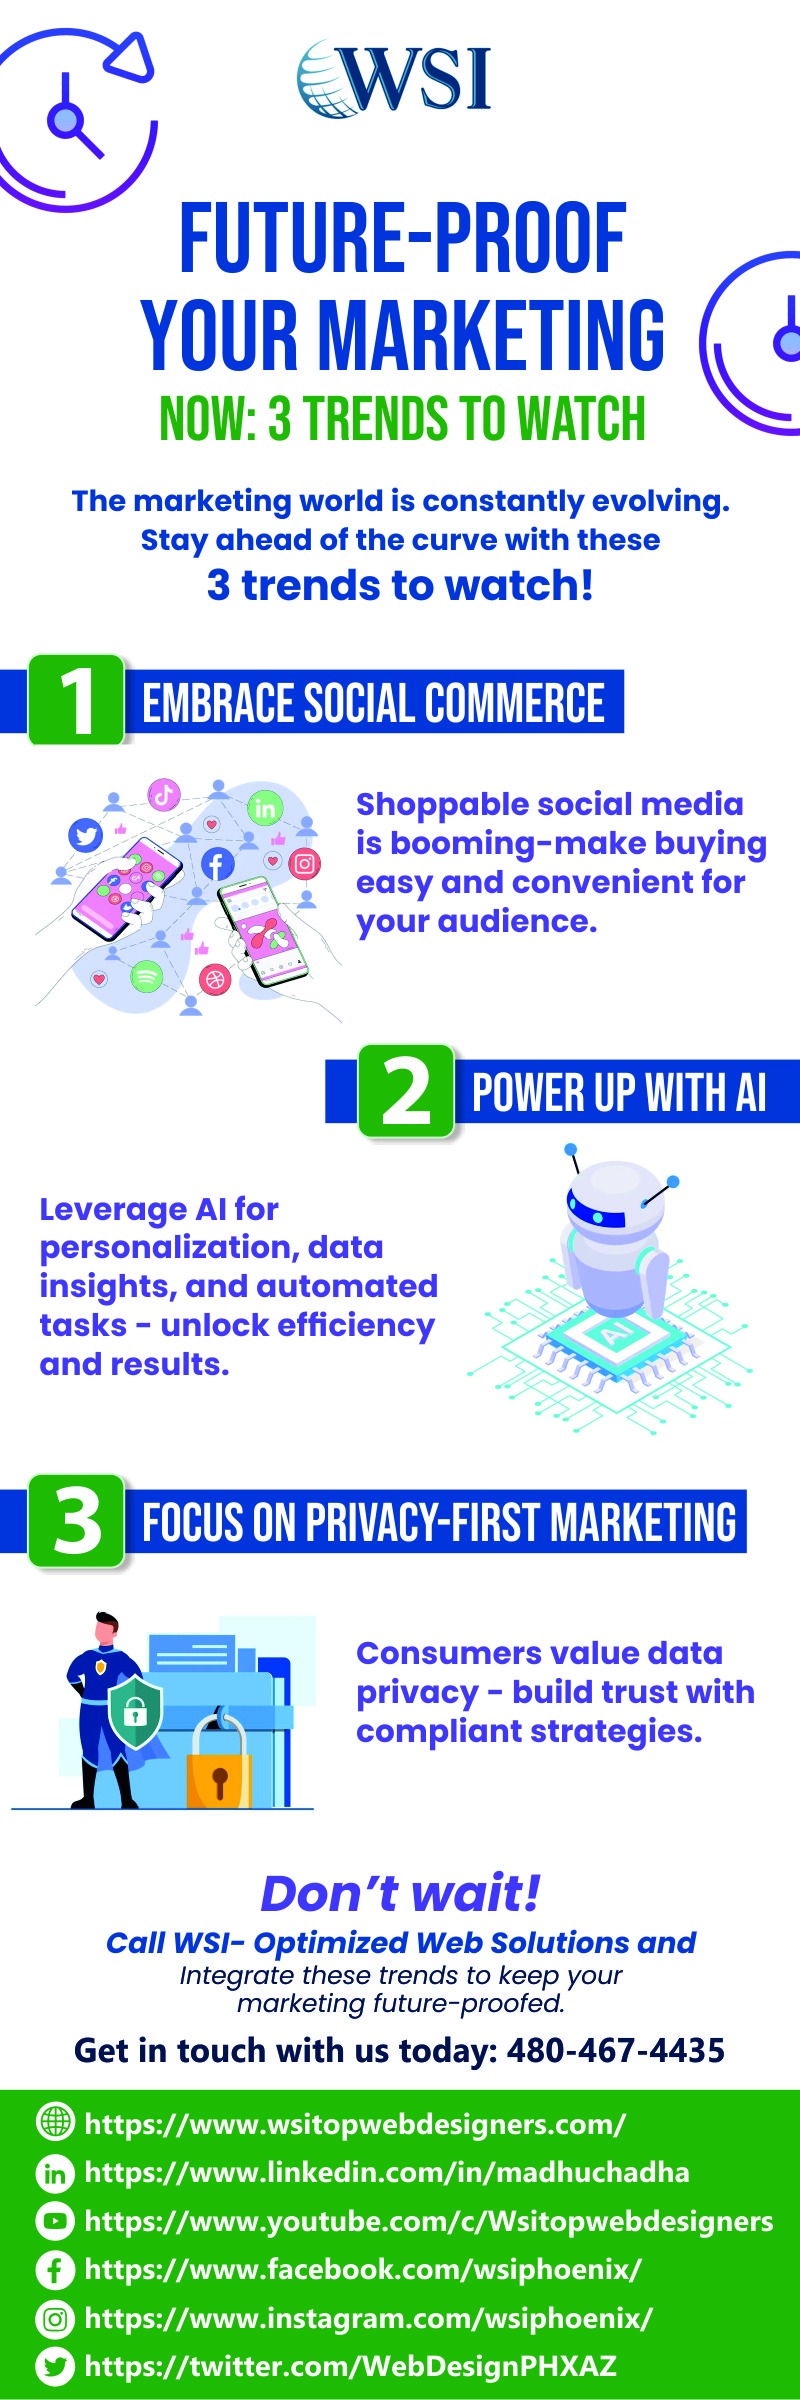 Future-Proof Your Marketing Now: 3 Trends to Watch - Social Social Social | Social Social Social